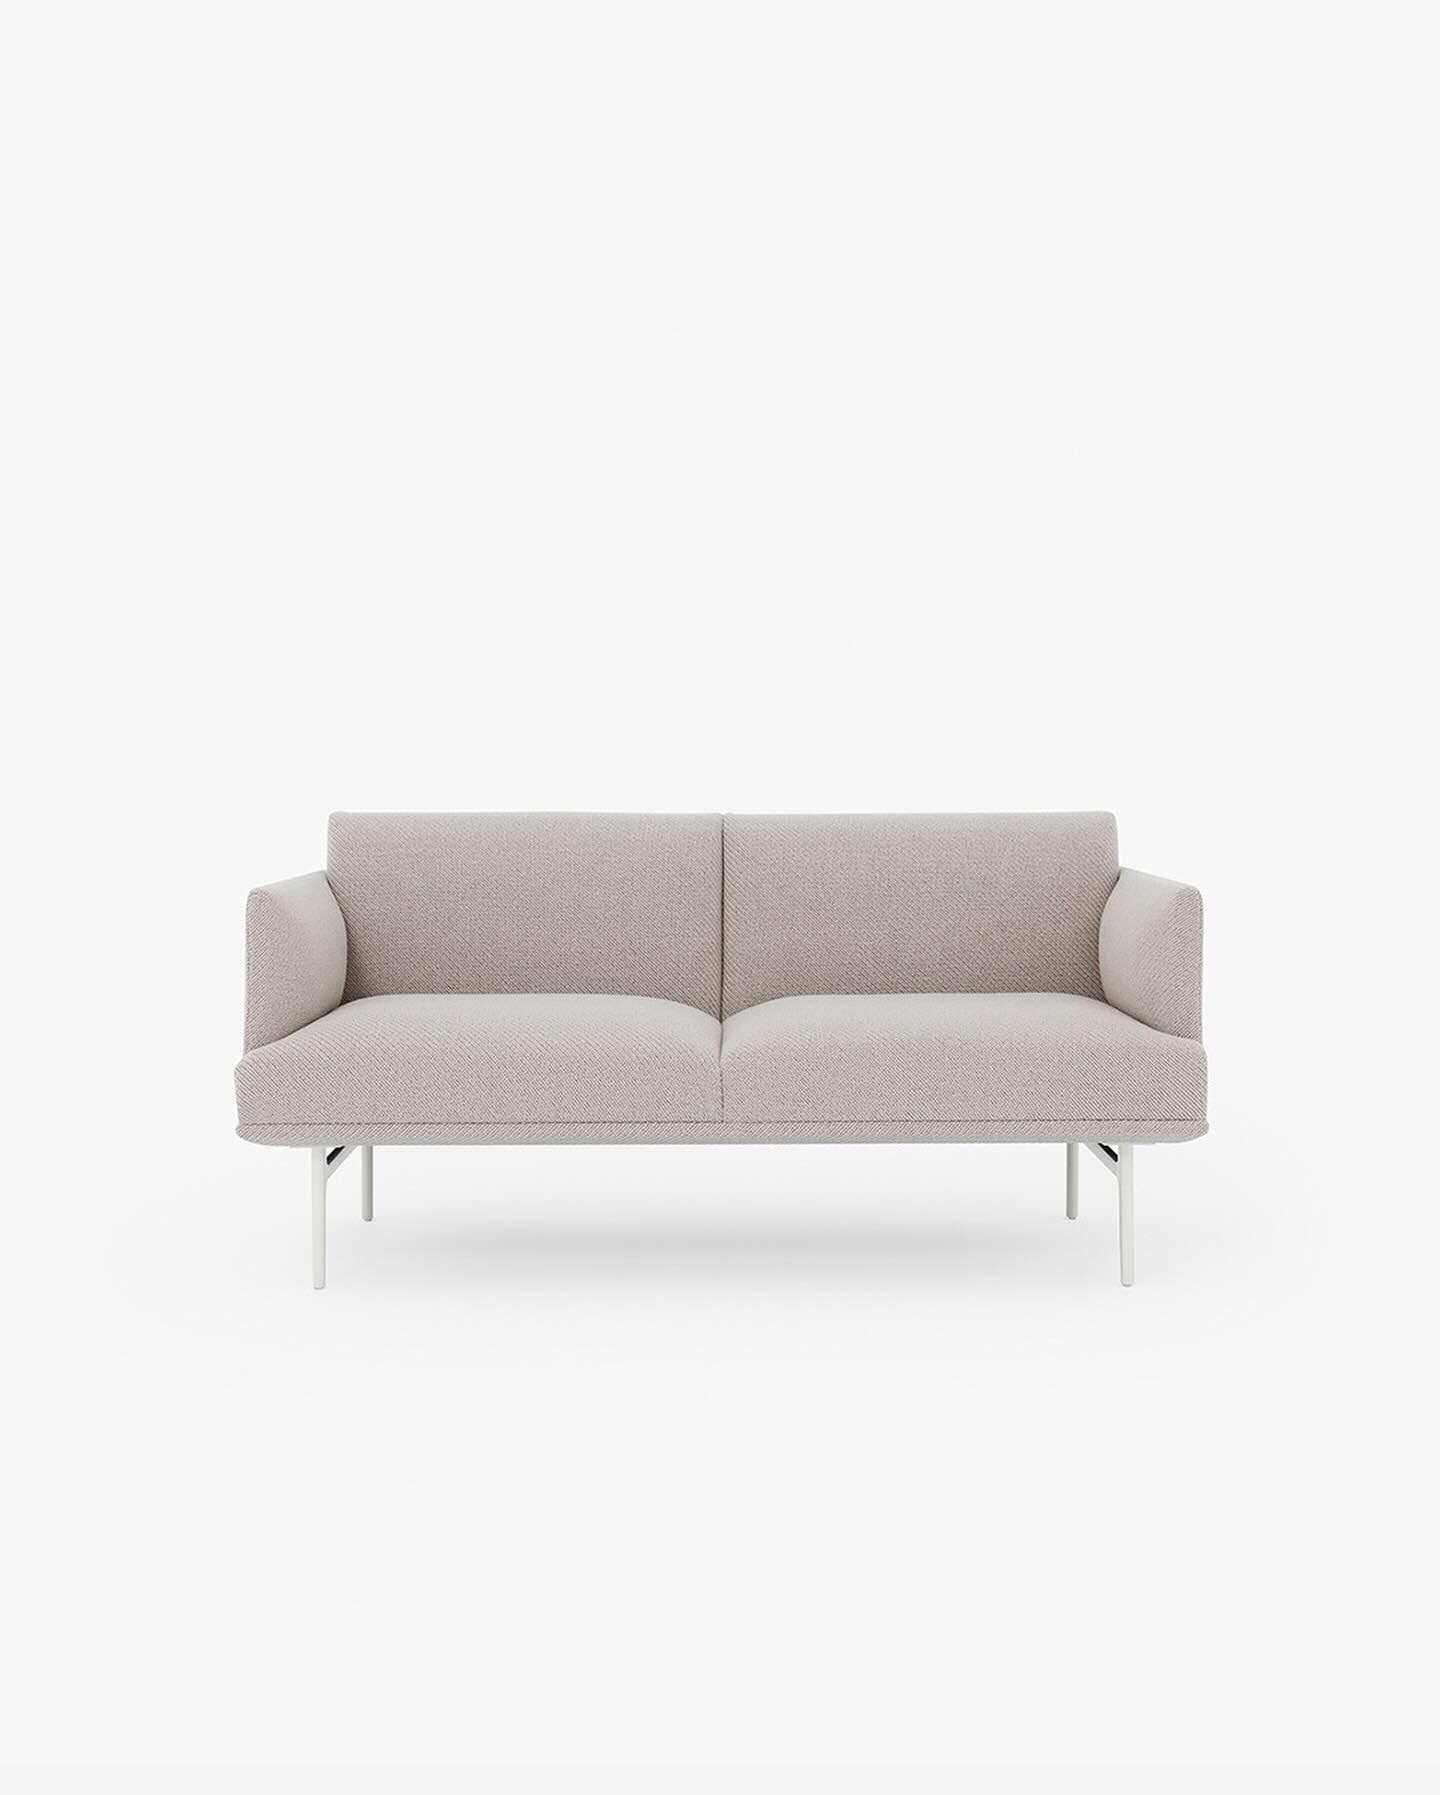 Presenting our Hero Sofa, where sleek lines meet timeless elegance. With its smooth and clean silhouette, Hero Sofa offers the perfect solution for a simple yet sophisticated seating experience. The seamless blend of elegance and comfort effortlessly